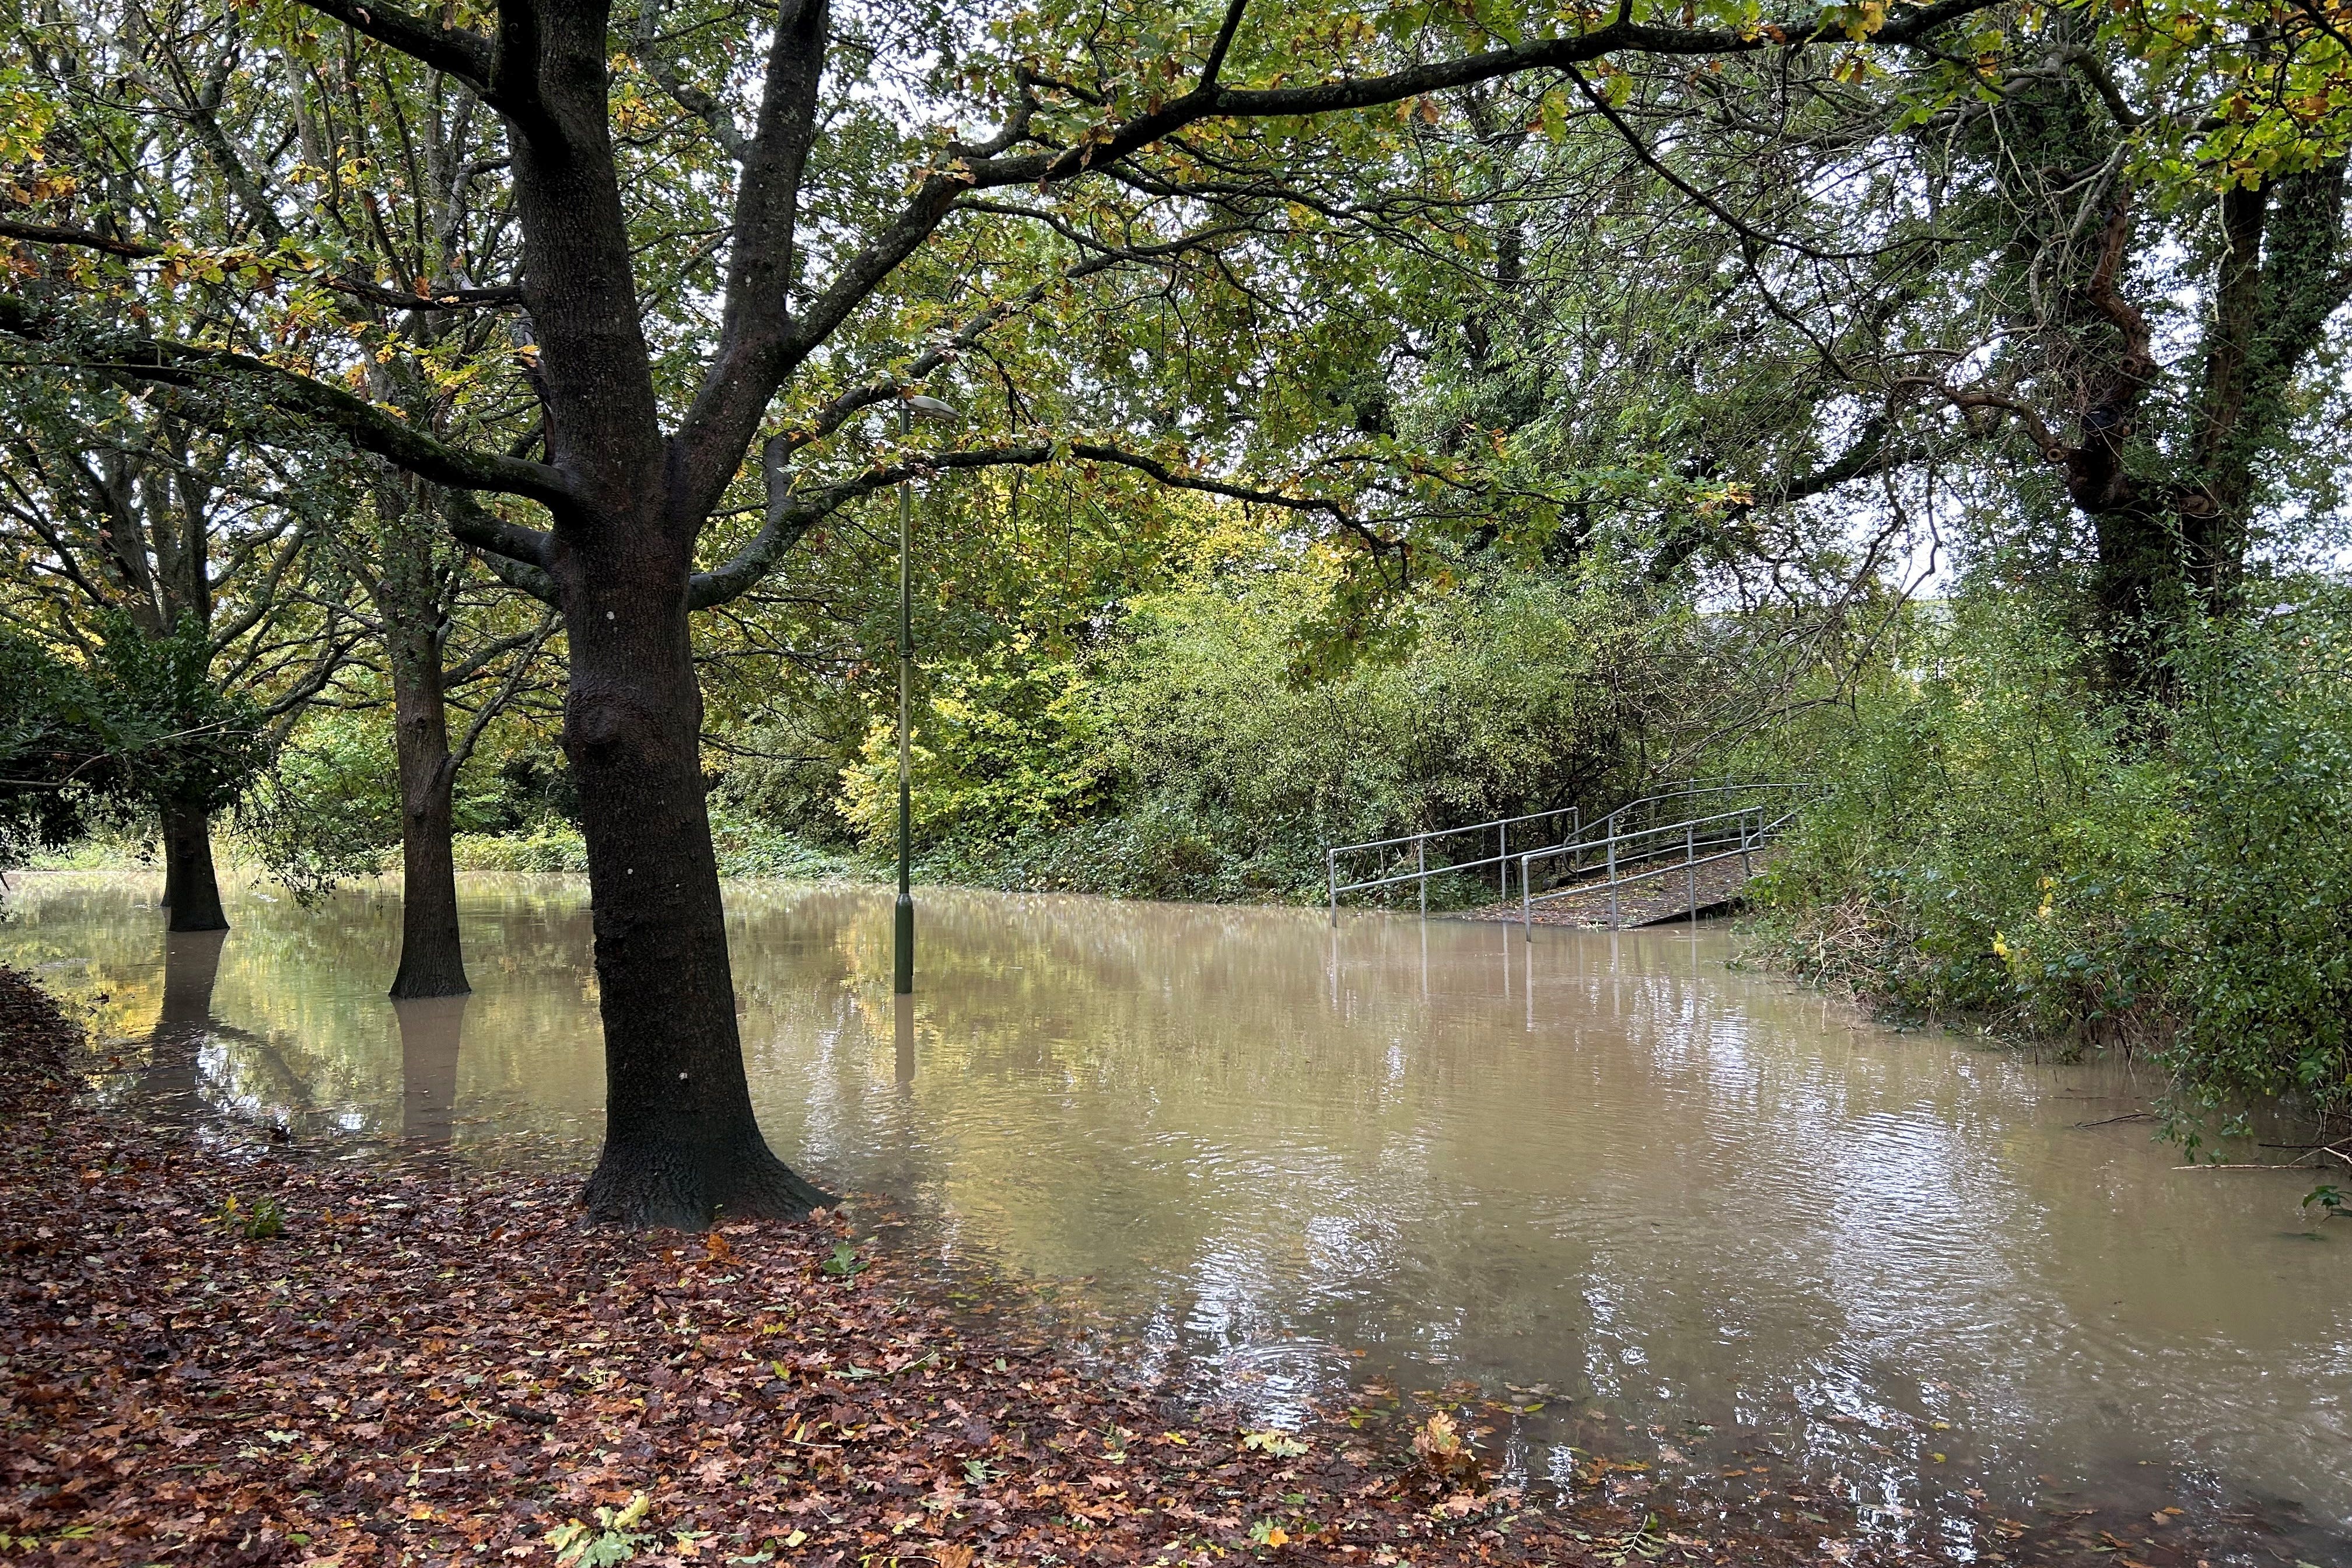 Stock image of a heavily flooded woodland area. (Jane Kirby/PA)